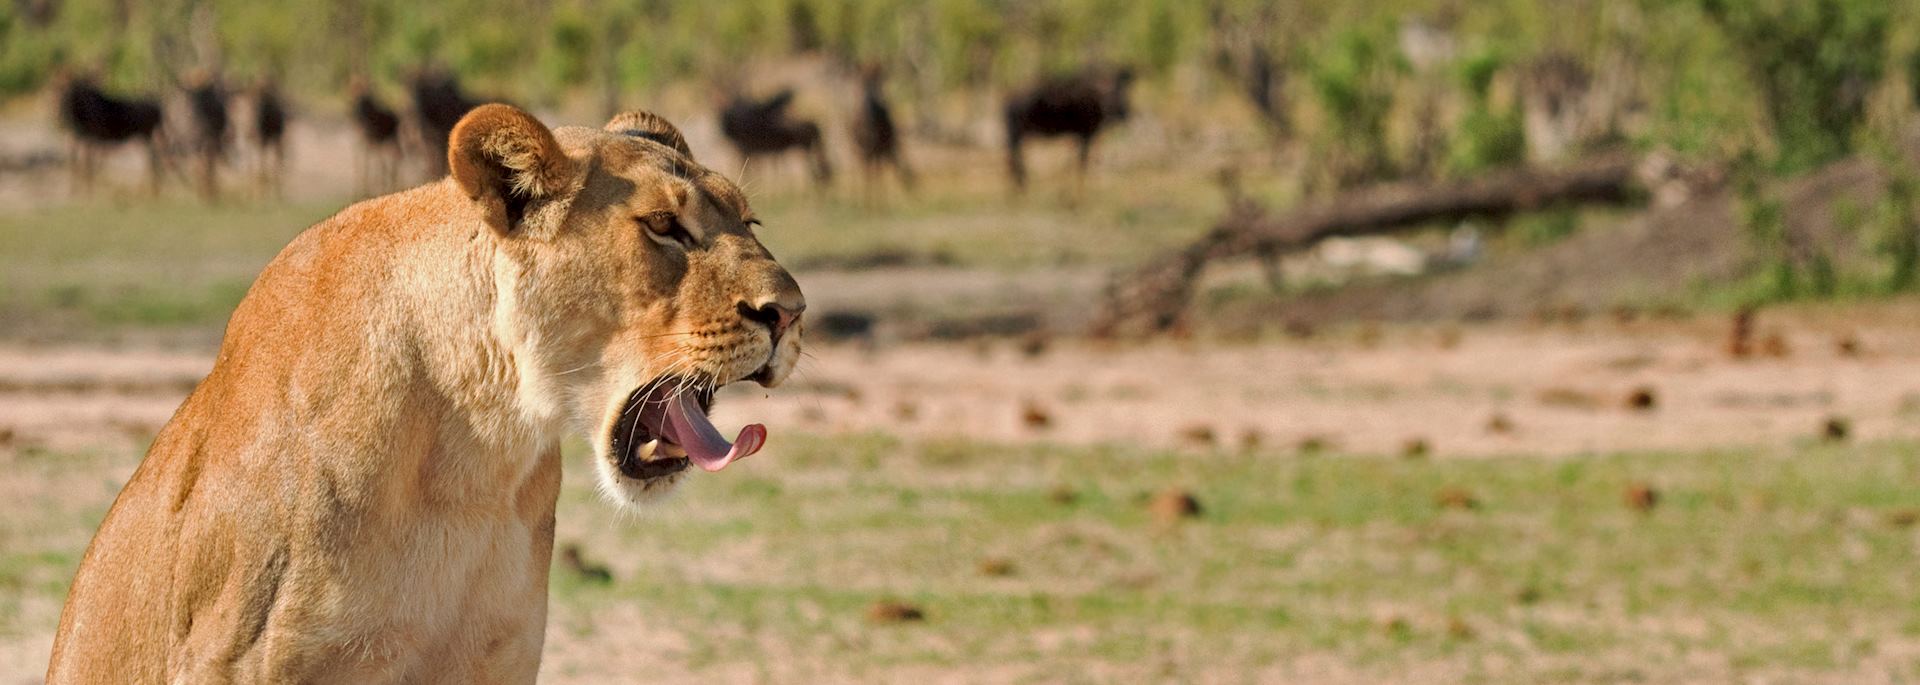 Lioness in Hwange National Park